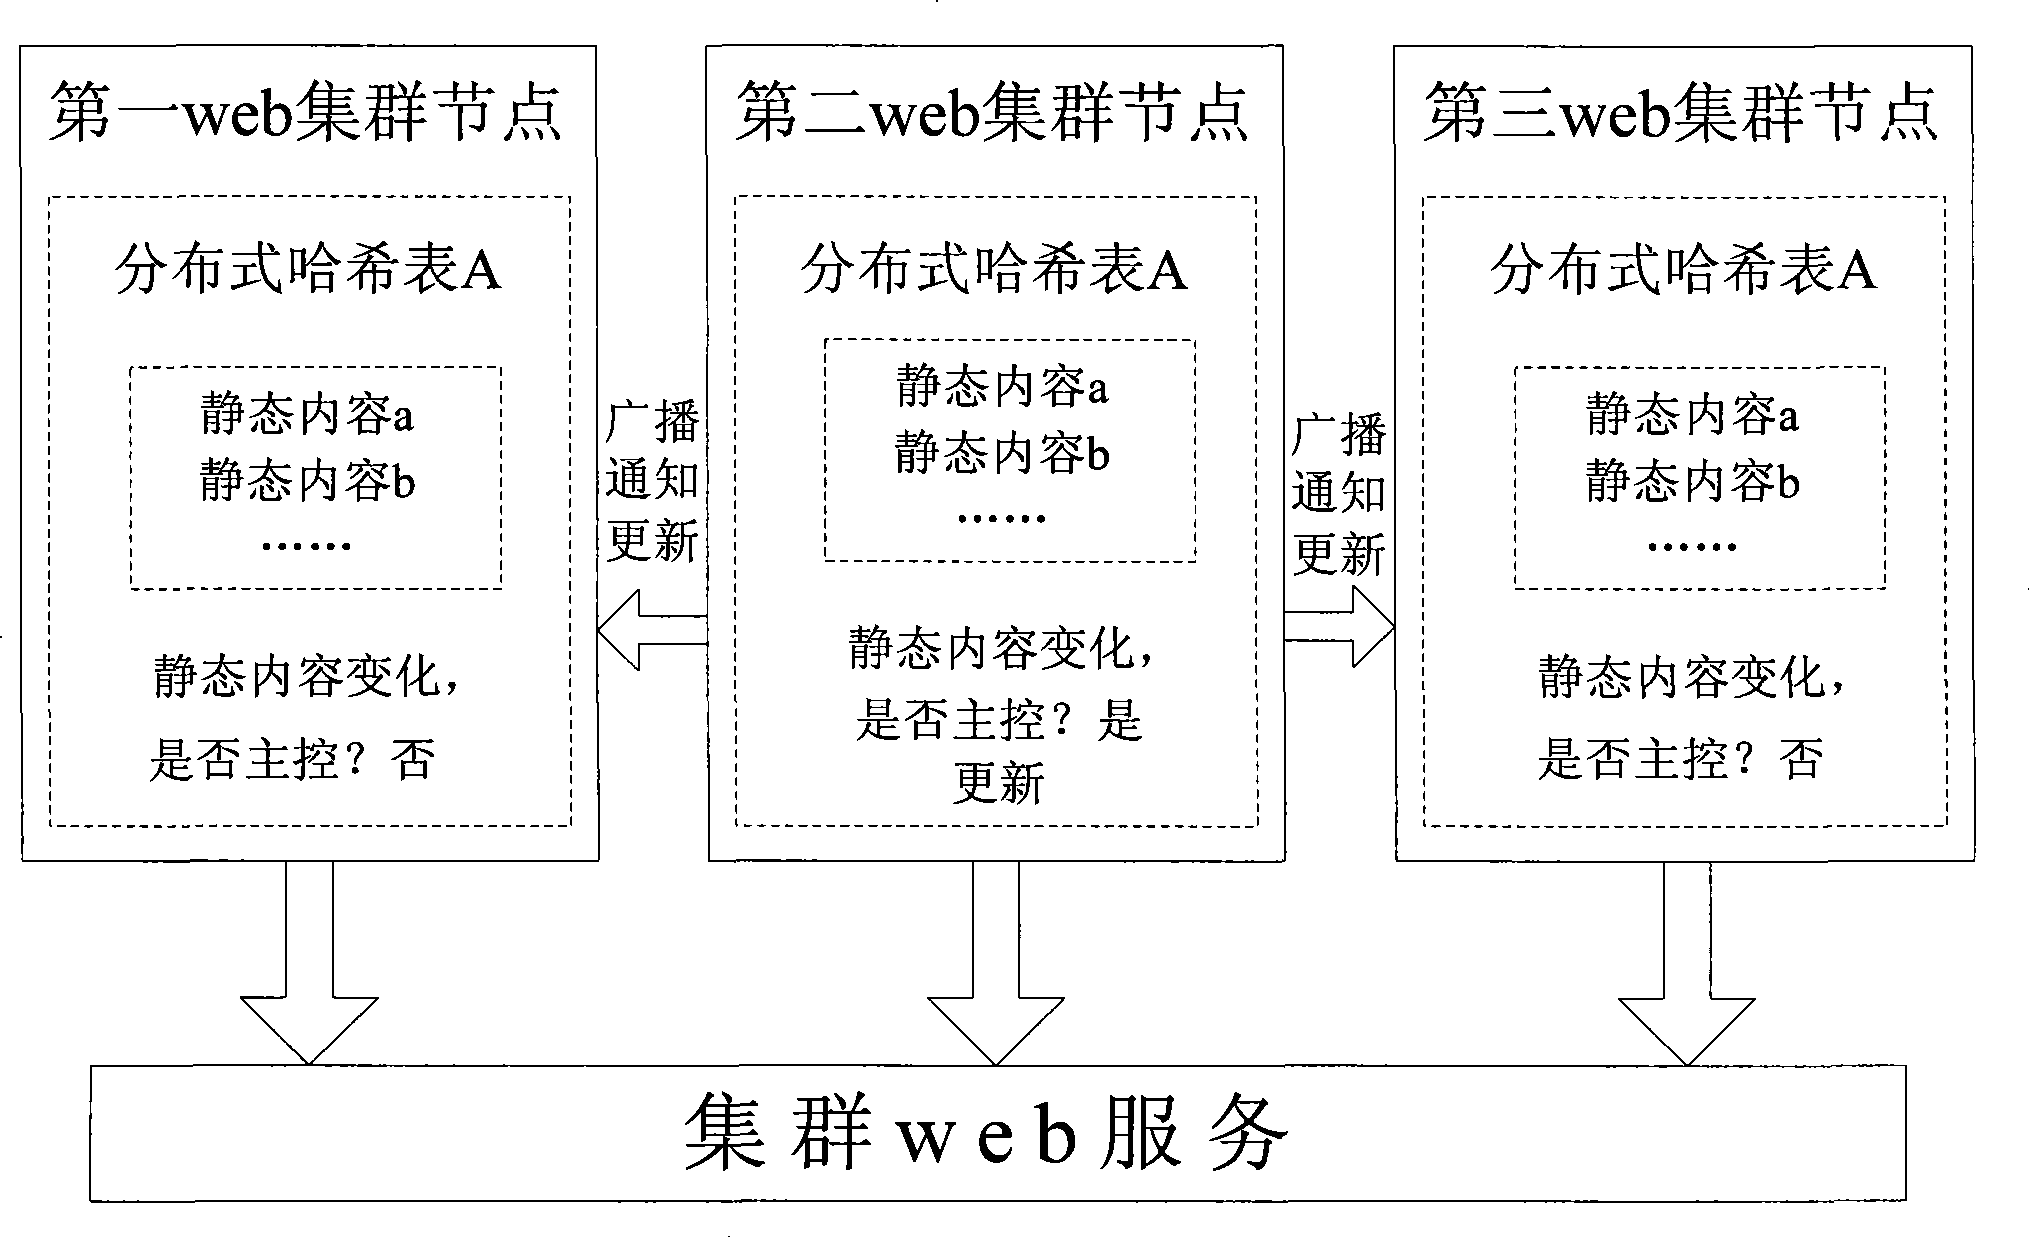 Method for improving cluster web service performance by using distributed hash table